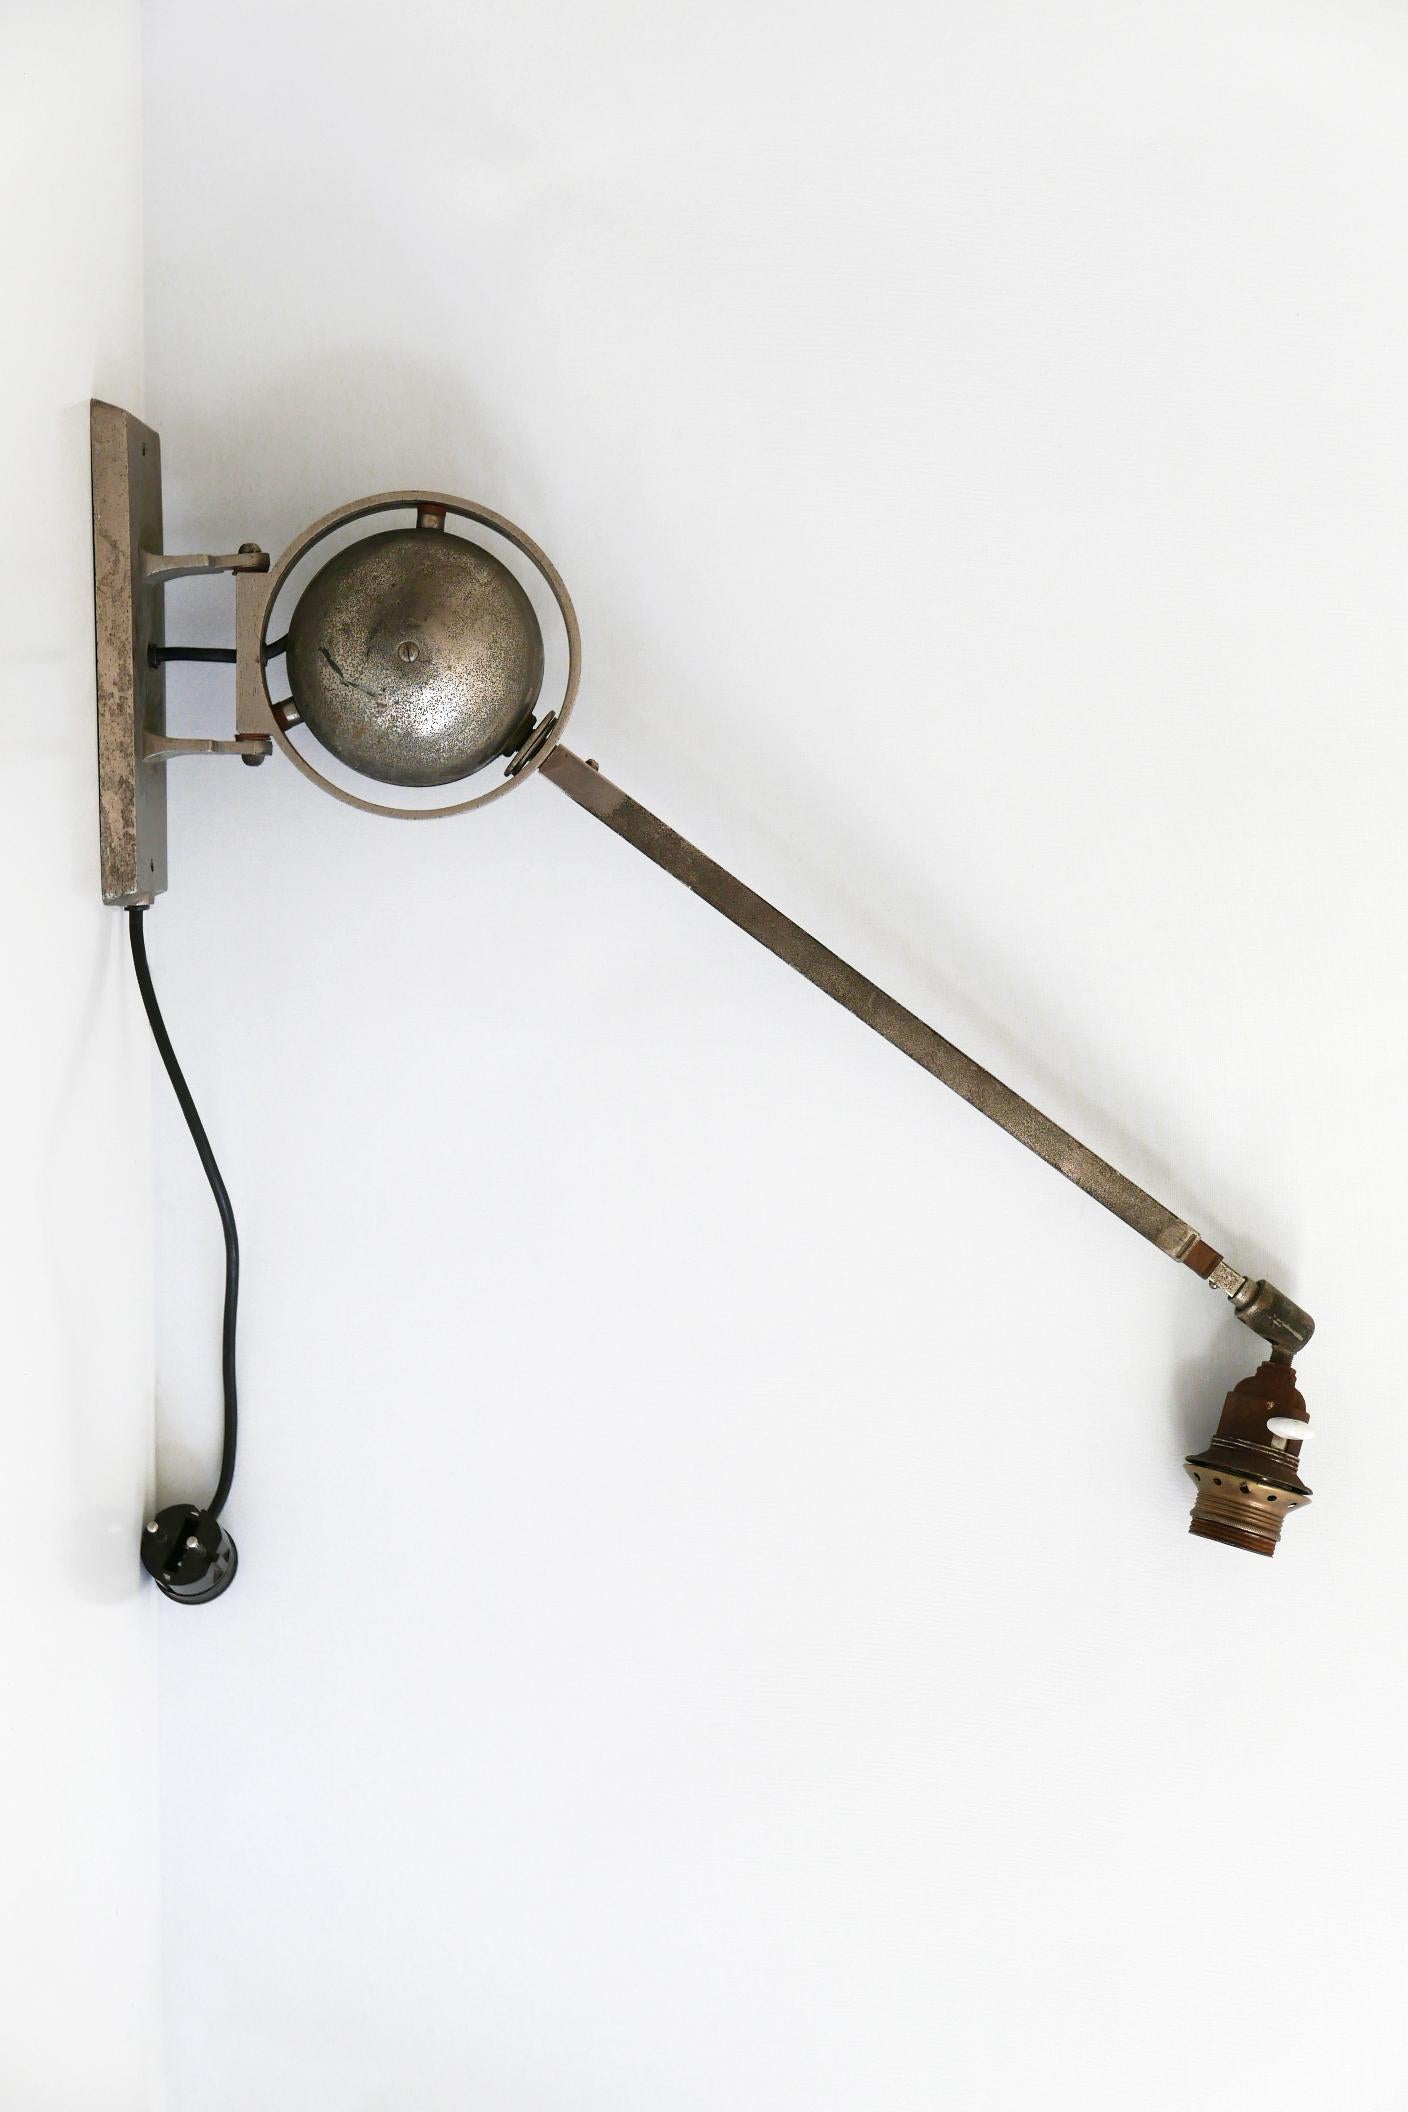 Unique Bauhaus Articulated Telescopic Wall Lamp 1920s Germany For Sale 1